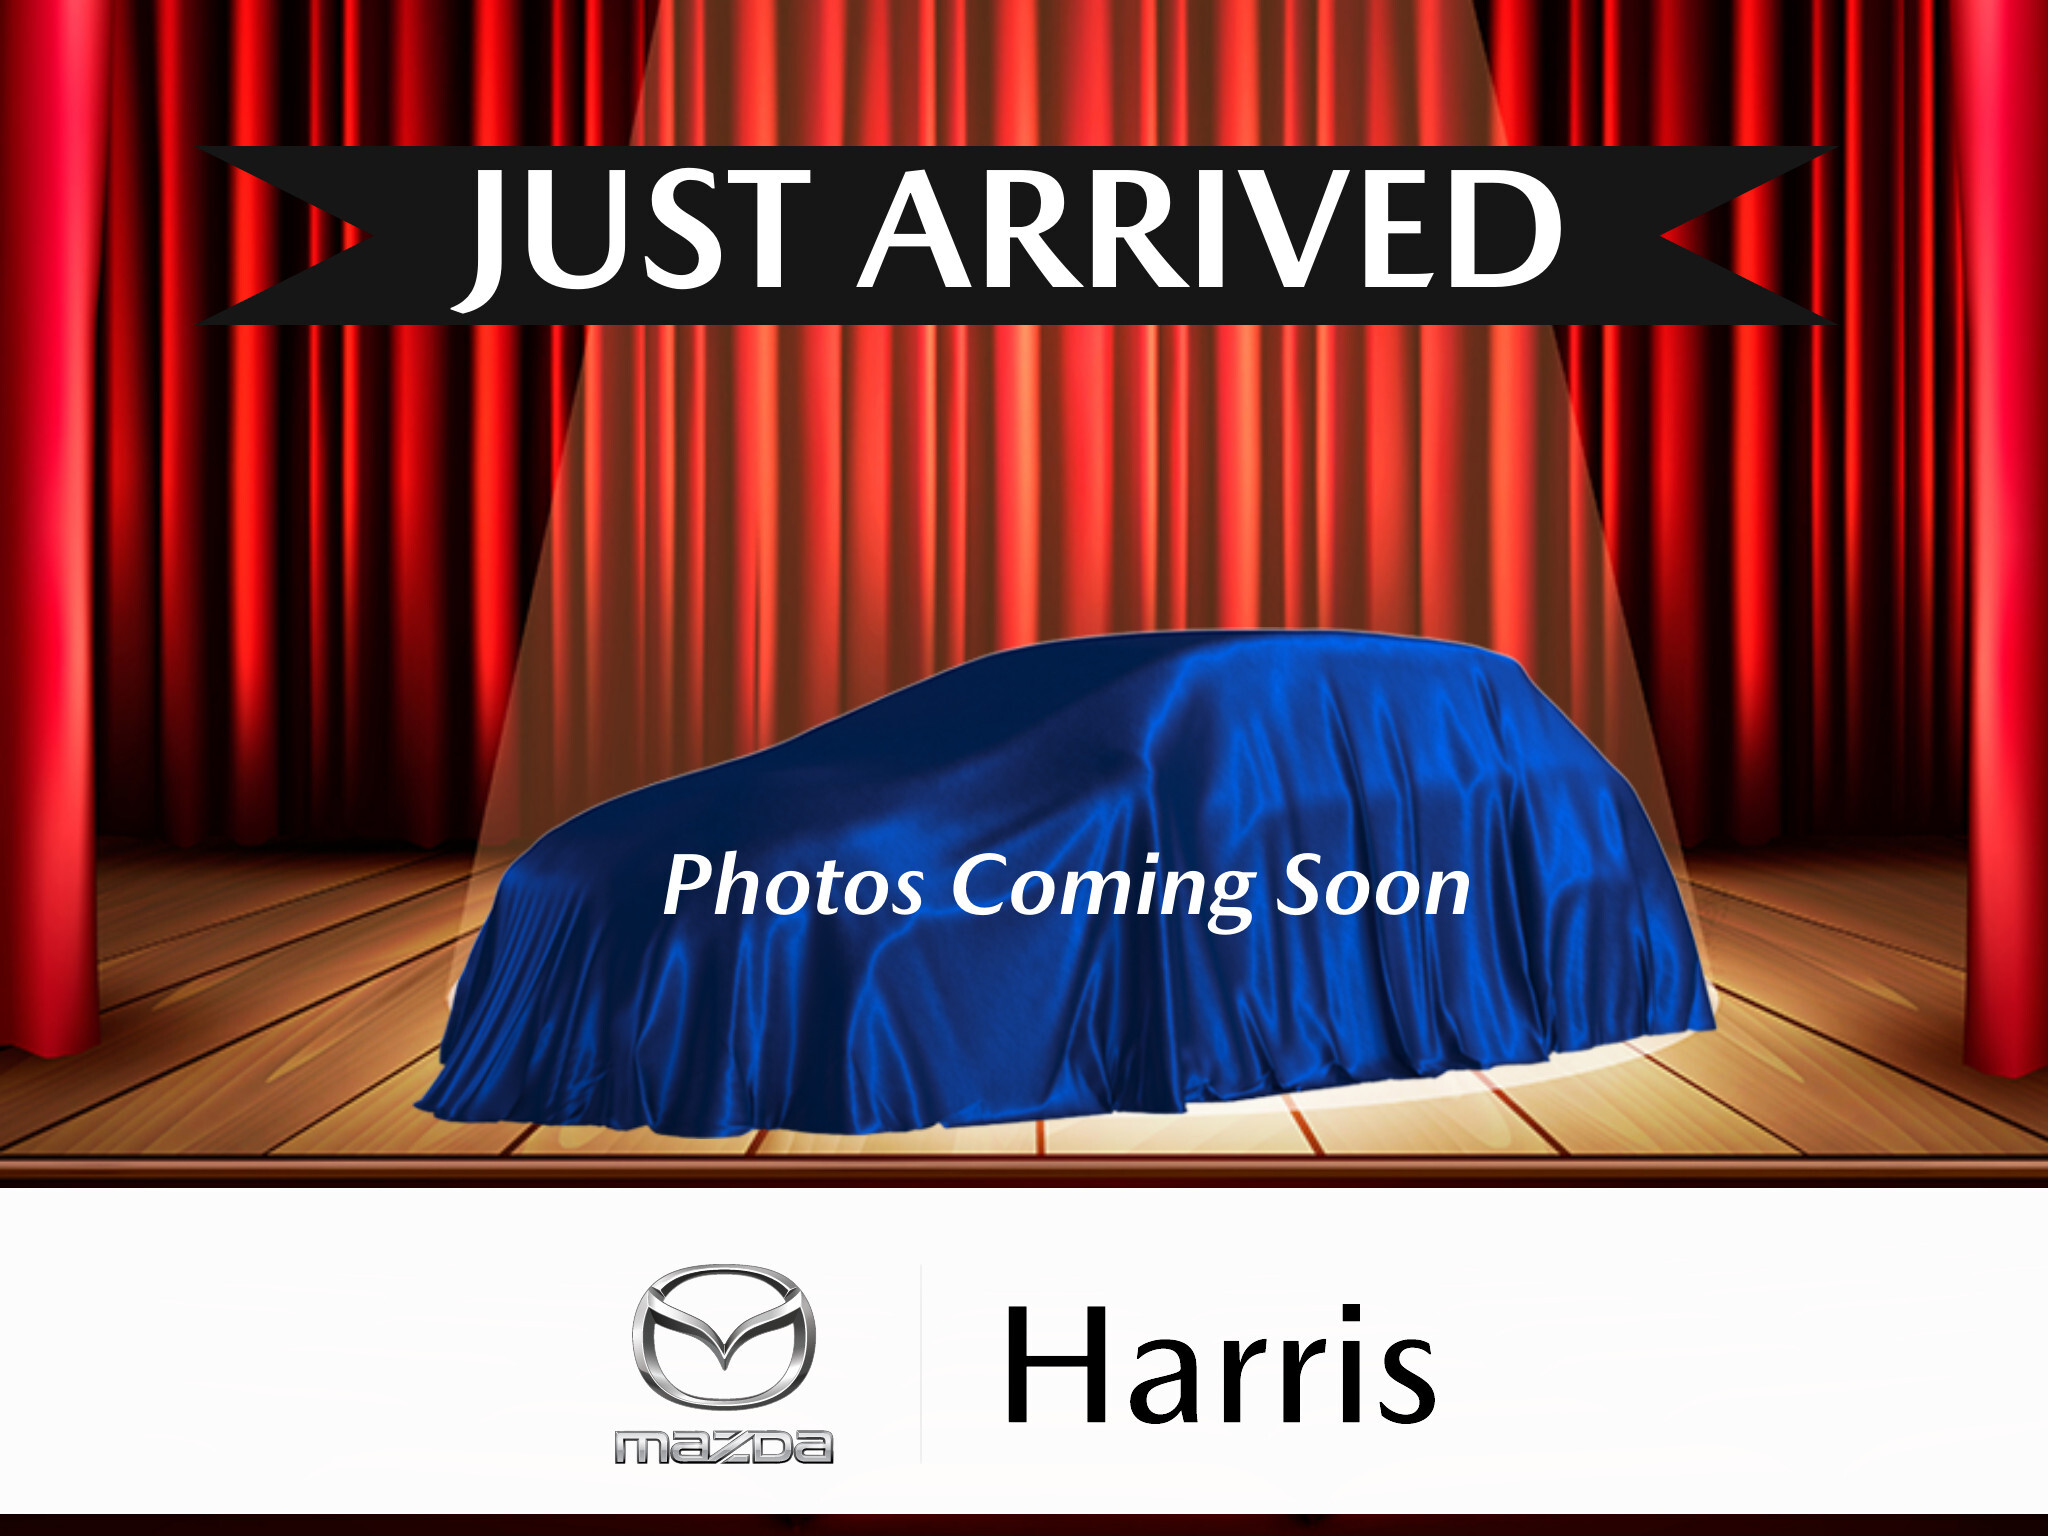 2012 Hyundai Tucson GLS ONE LOCAL OWNER / ACCIDENT FREE / SERVICED!!